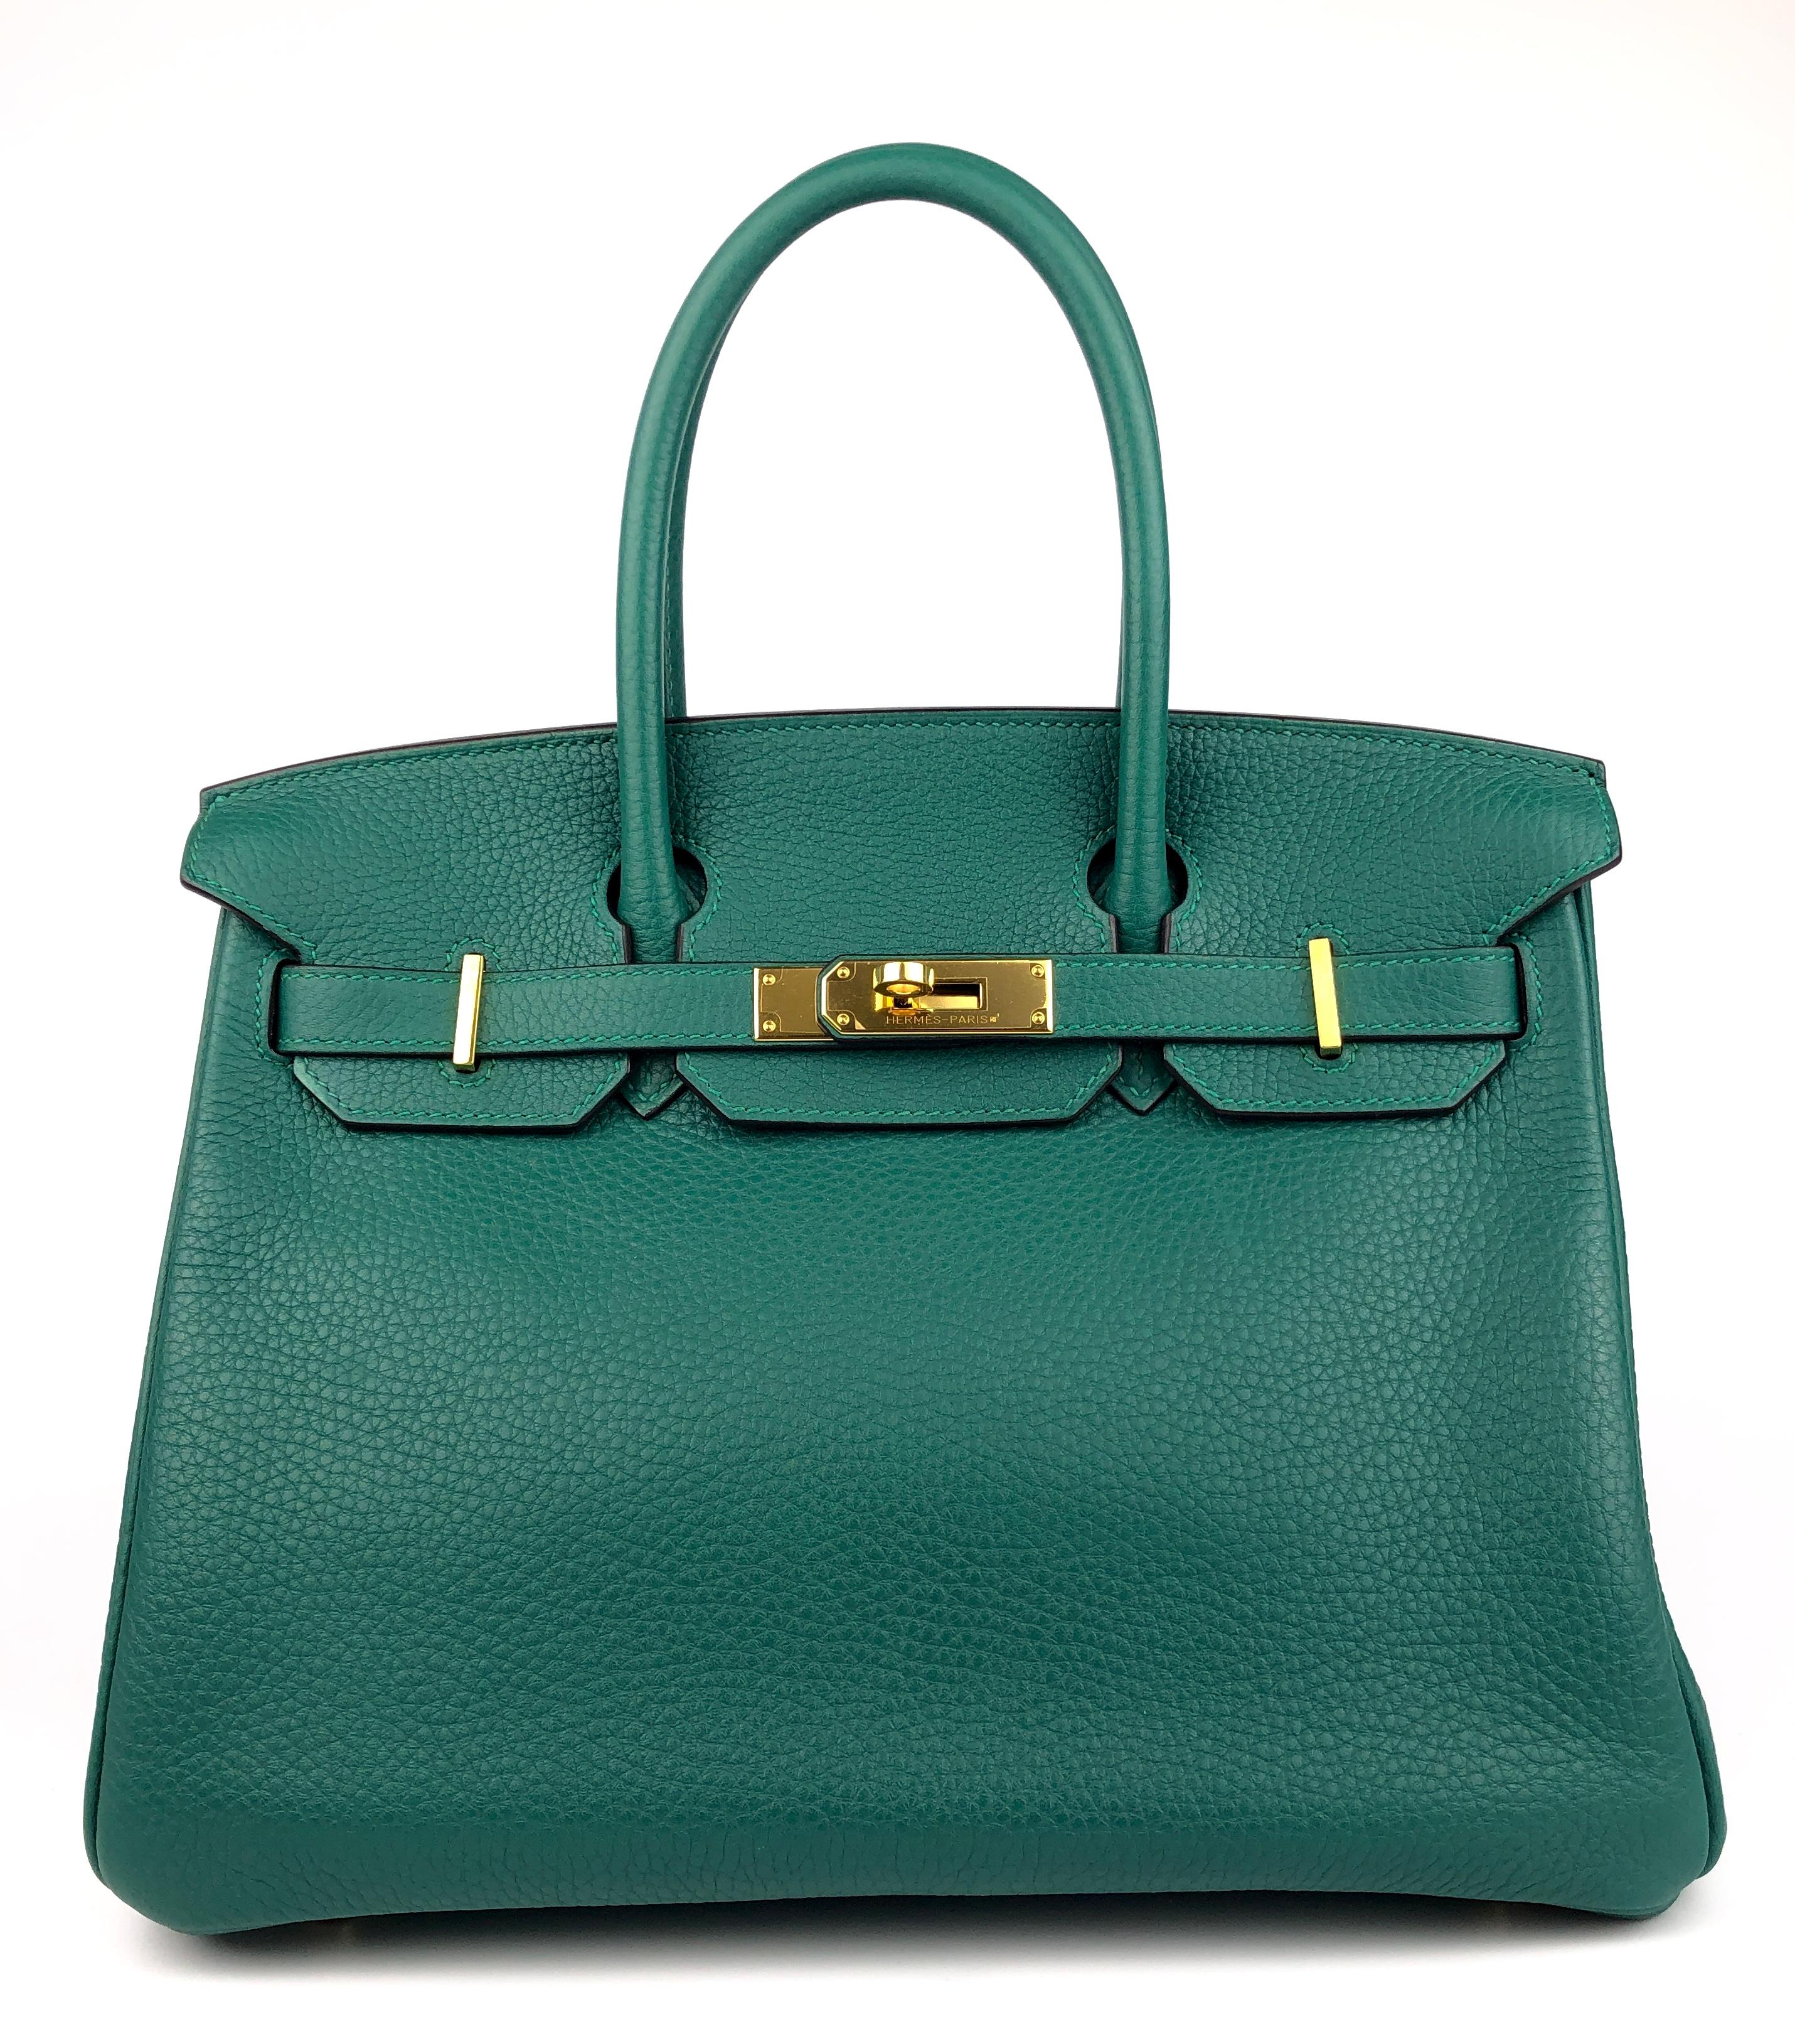 Stunning Hermes Birkin 30 Malachite Green complimented by Gold Hardware. Excellent Condition with Plastic on Hardware. 2015 T Stamp. 

Shop with Confidence from Lux Addicts. Authenticity Guaranteed! 